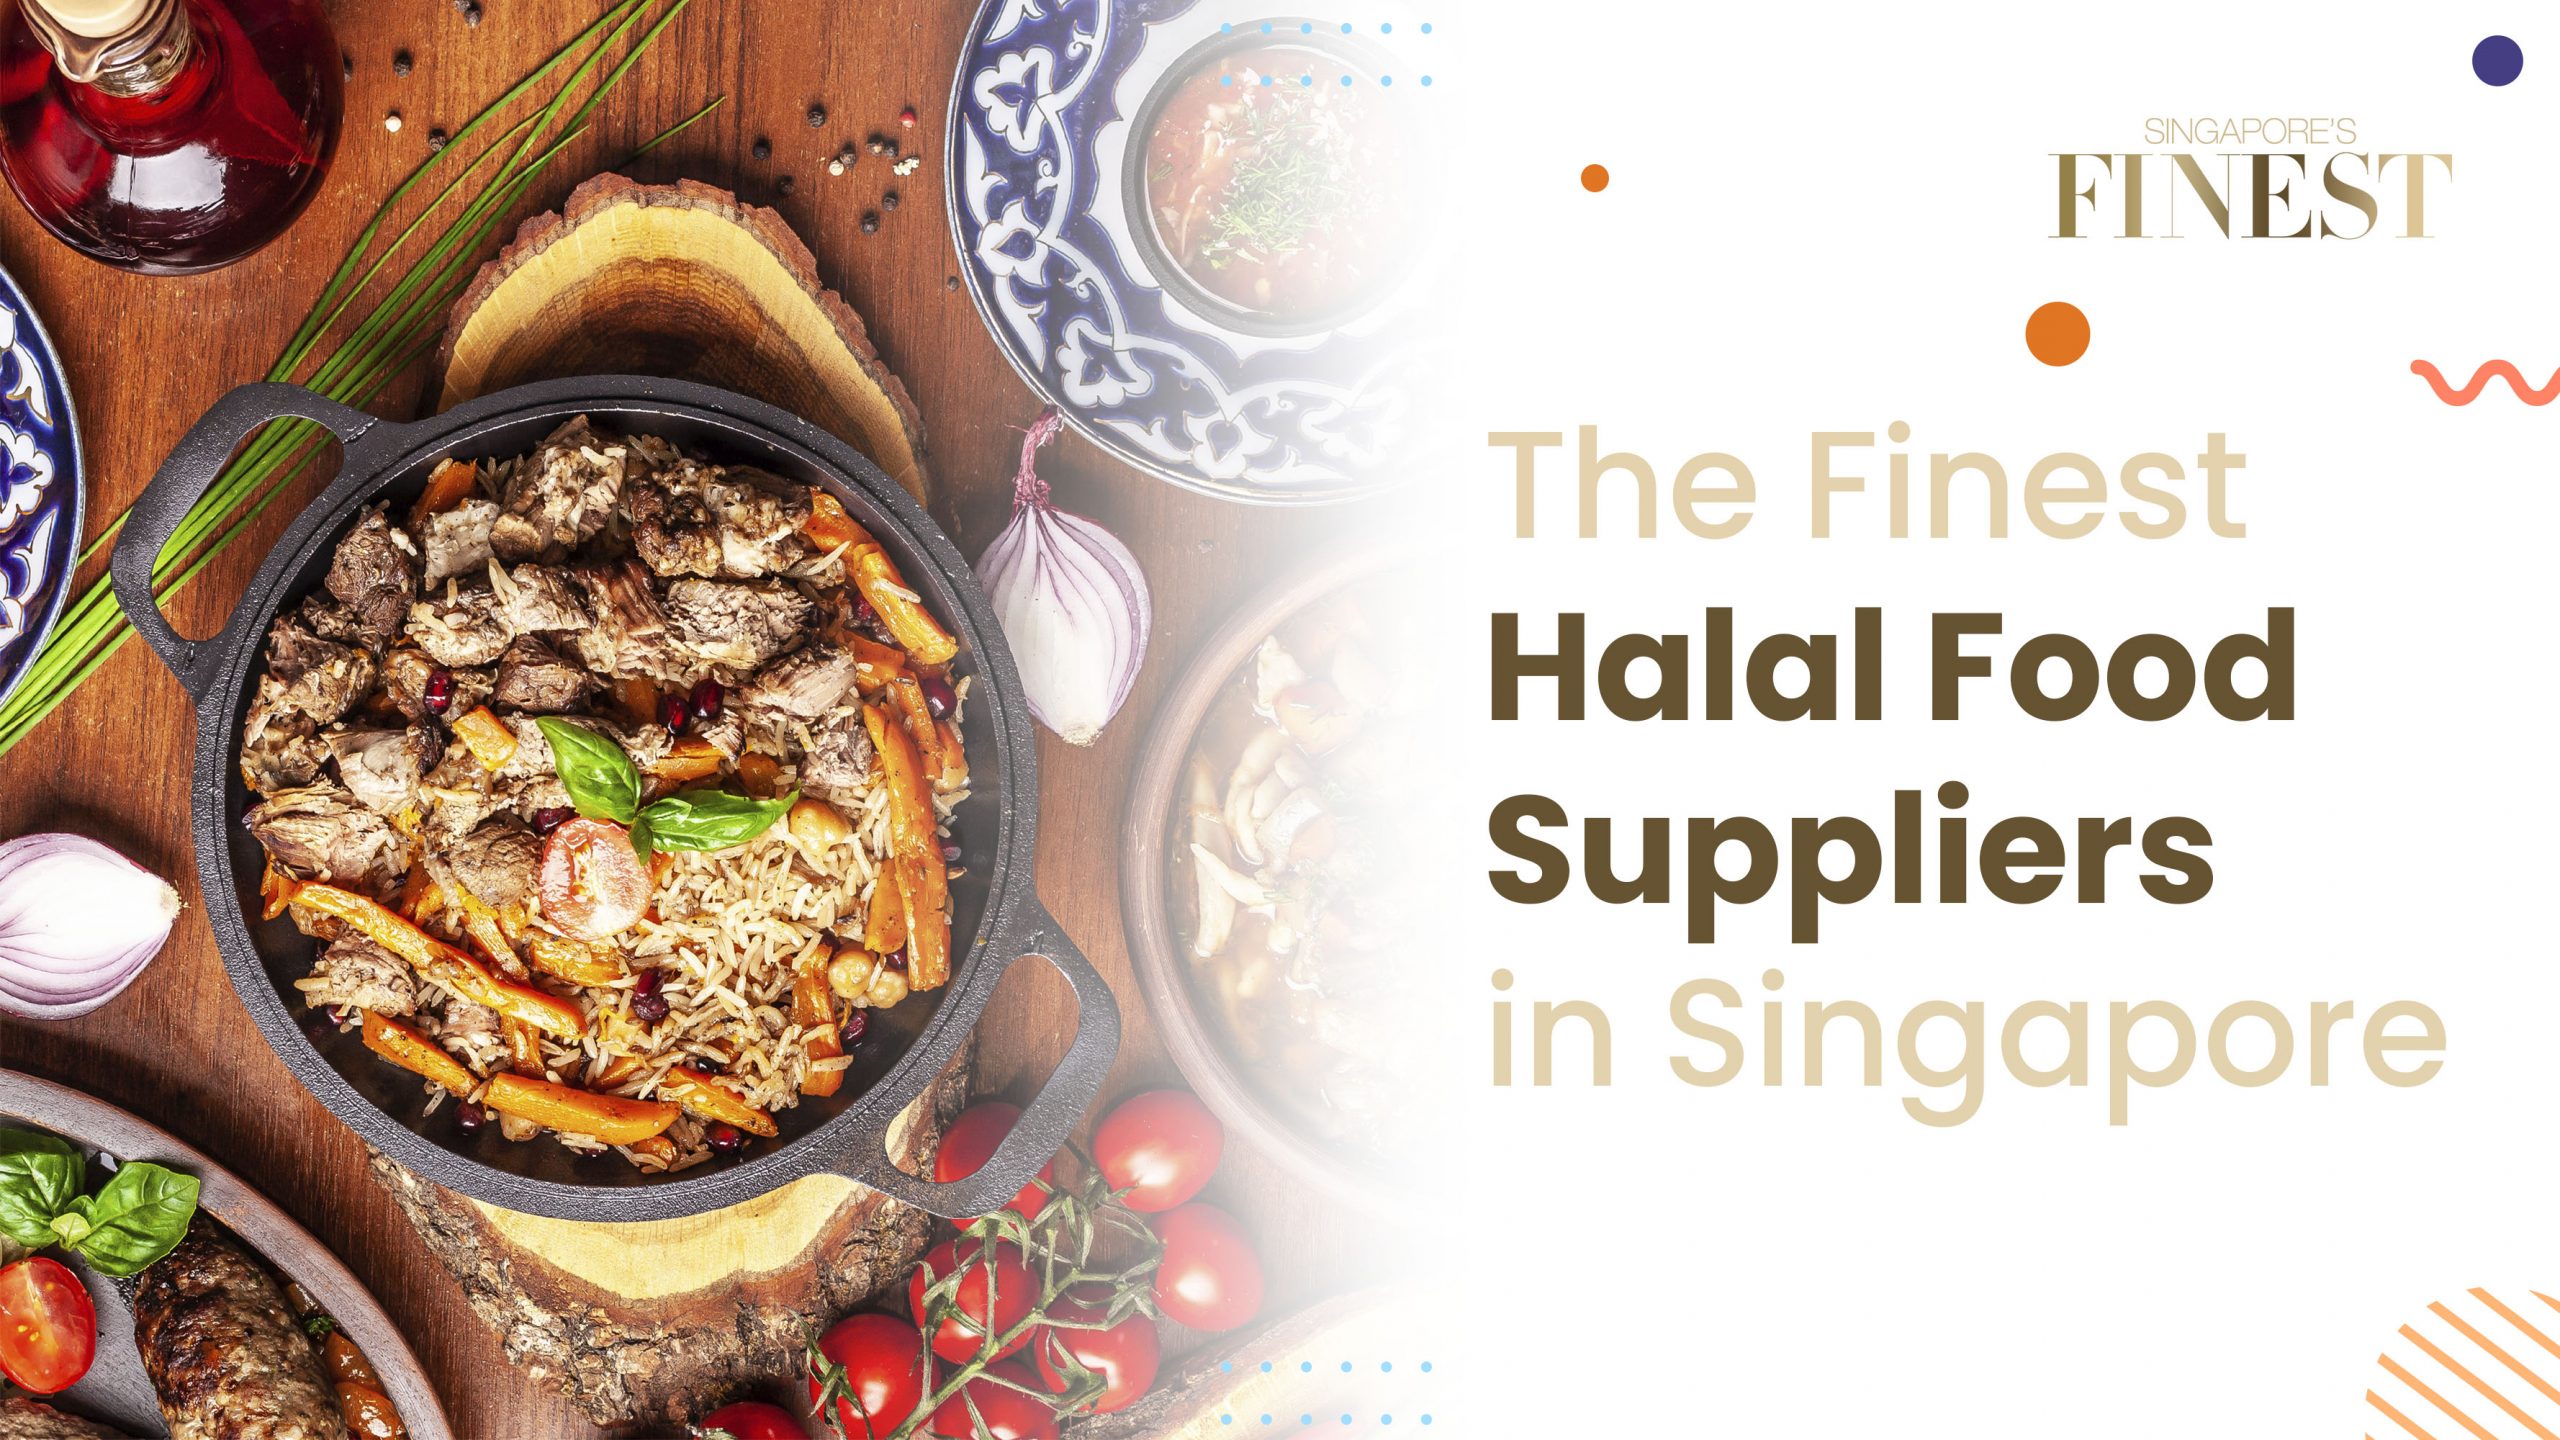 Halal food suppliers in Singapore